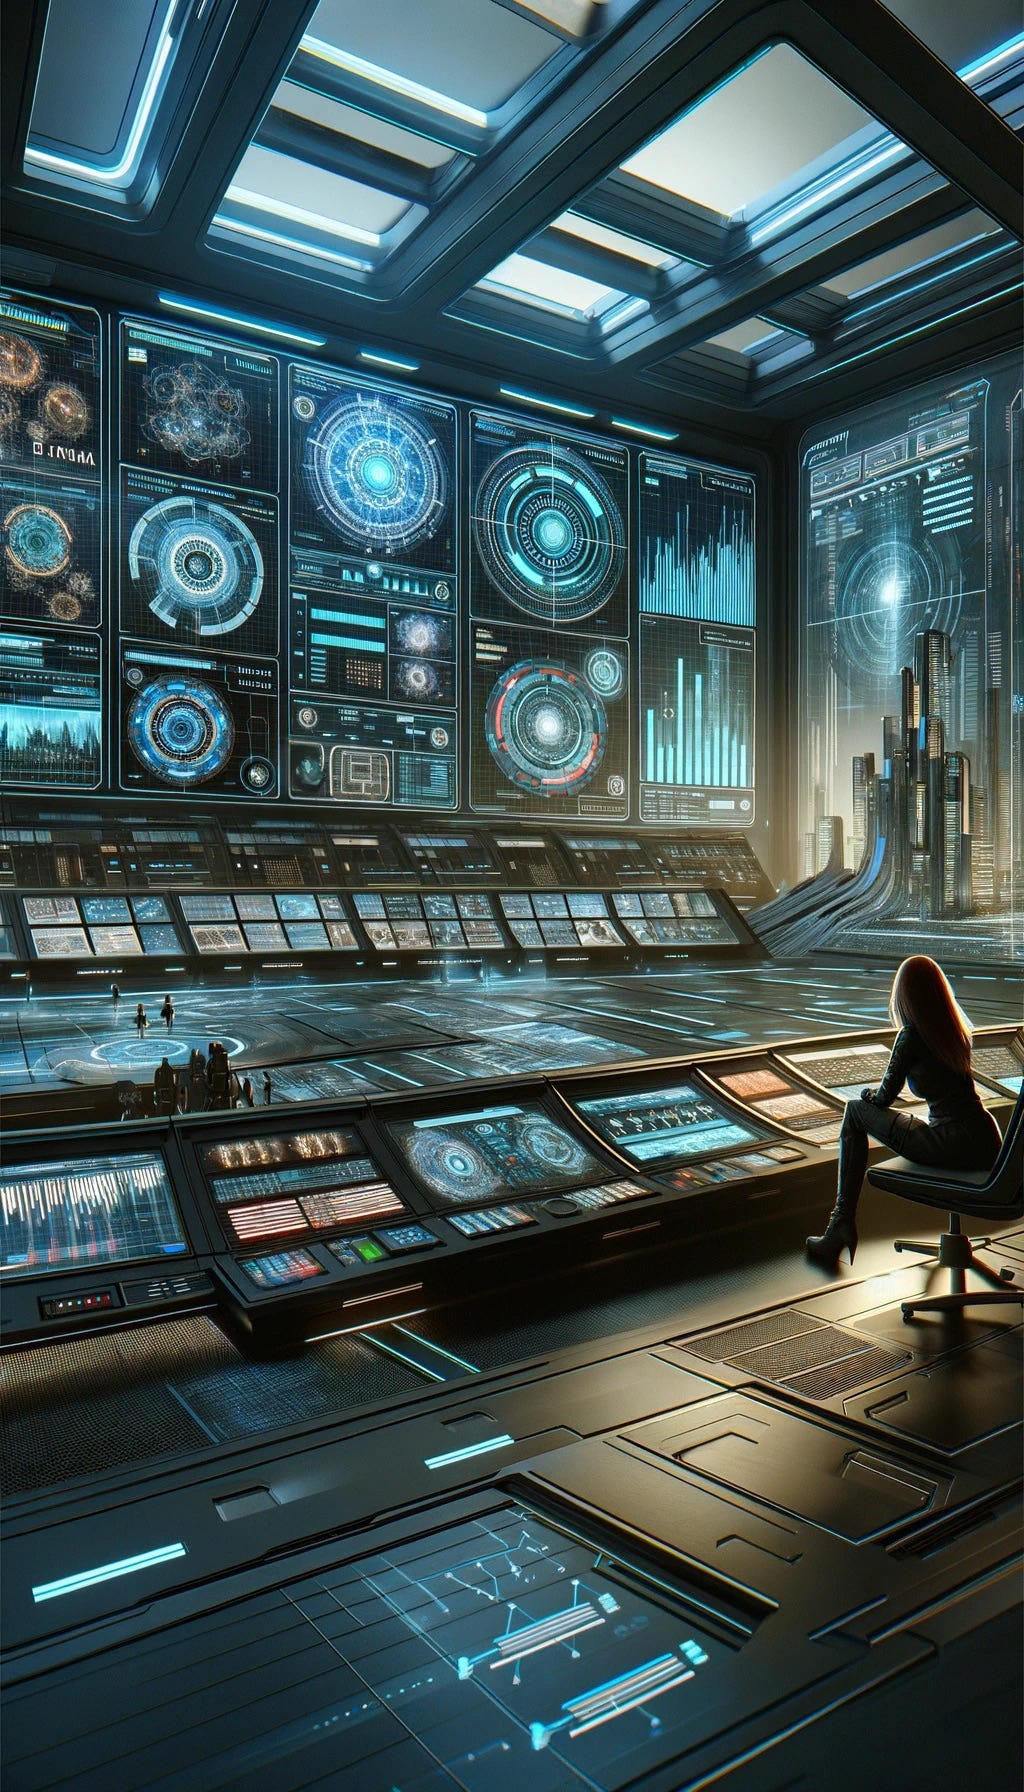 A futuristic city’s control center, with a woman, Valeria, observing various futuristic screens displaying infographics and dynamic models. The interior should reflect a high-tech environment with a sleek design, suggesting advanced AI governance. The screens show complex data visualizations that hint at anomalies and imperfections. Valeria appears contemplative and uneasy, her expression one of concern as she studies the displays. Image 2